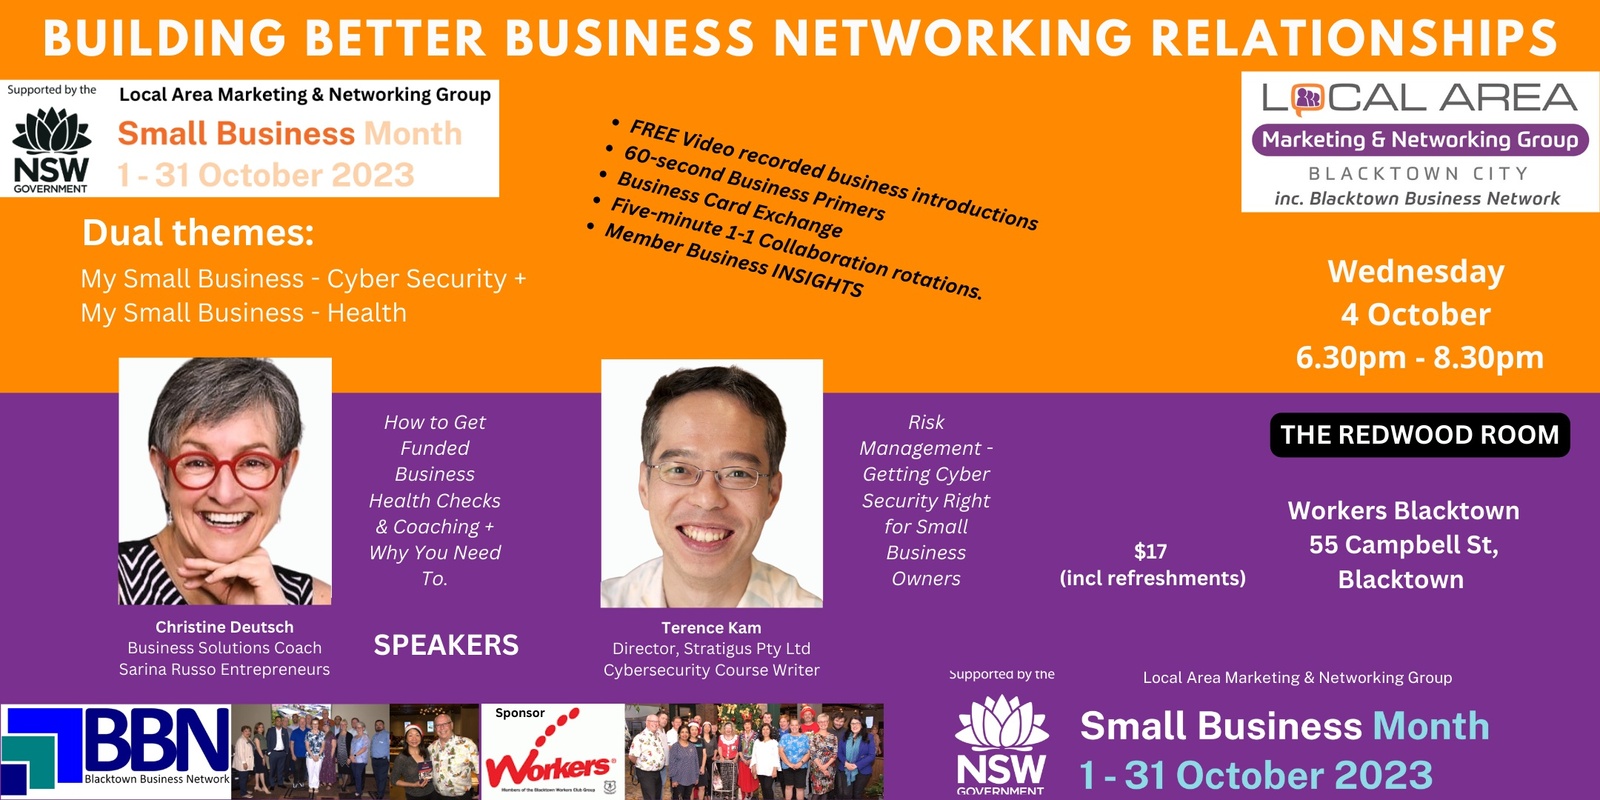 Banner image for 4 Oct - Blacktown City Networking (BBN) - Building Better Business Relationships